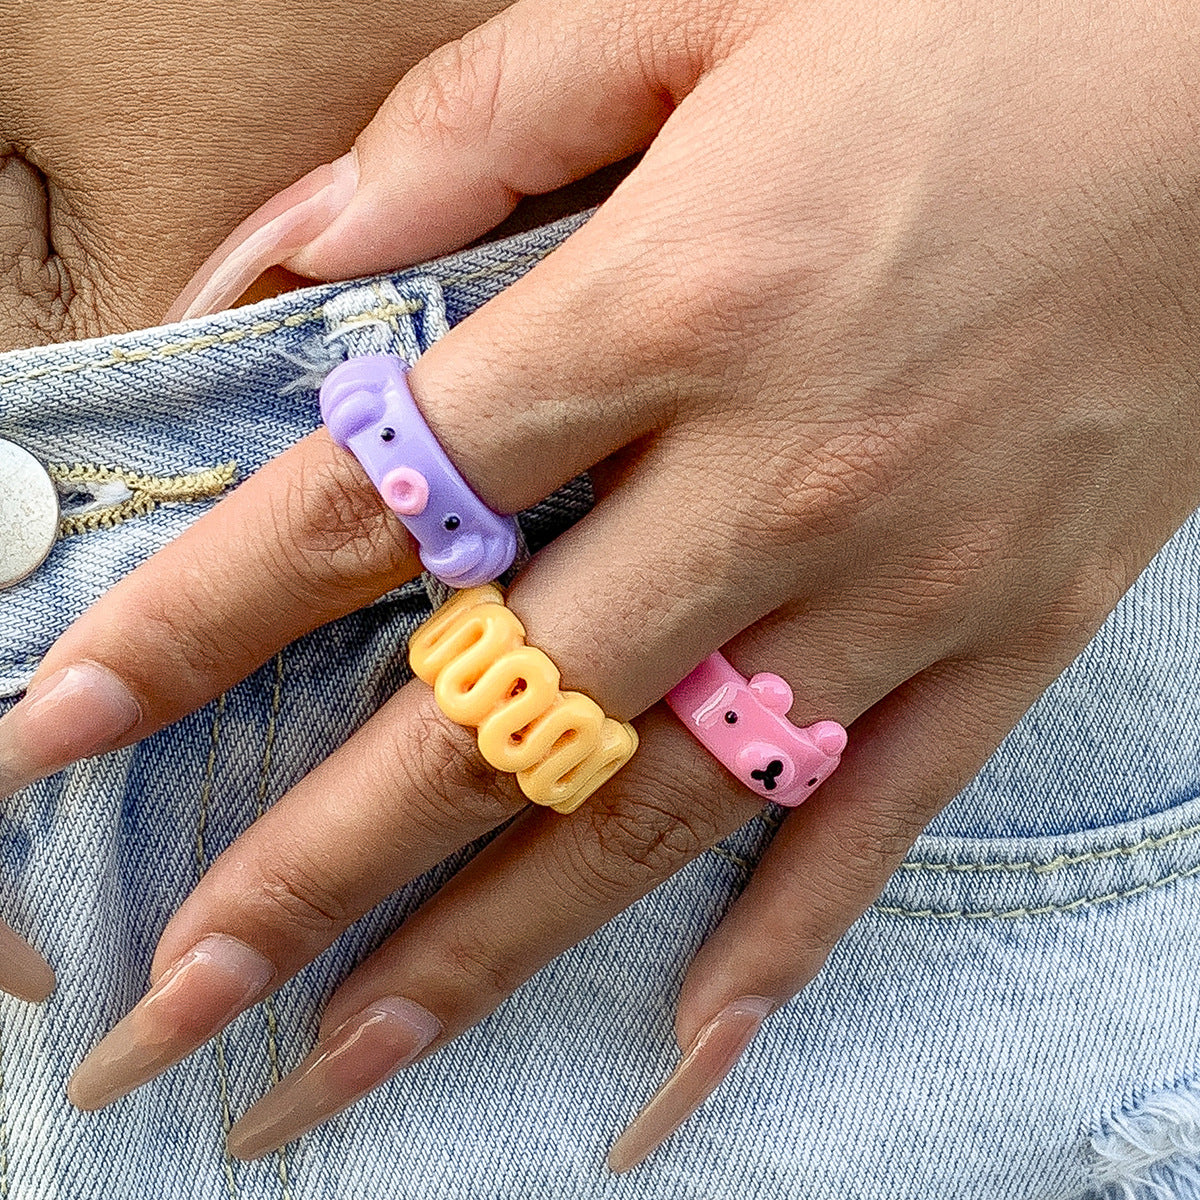 Versatile Bear, Geometric Rings, Women's Jewelry Sets, and Unique Three-Dimensional Hand Accessories with a Mix of Sweet and Cool Designs